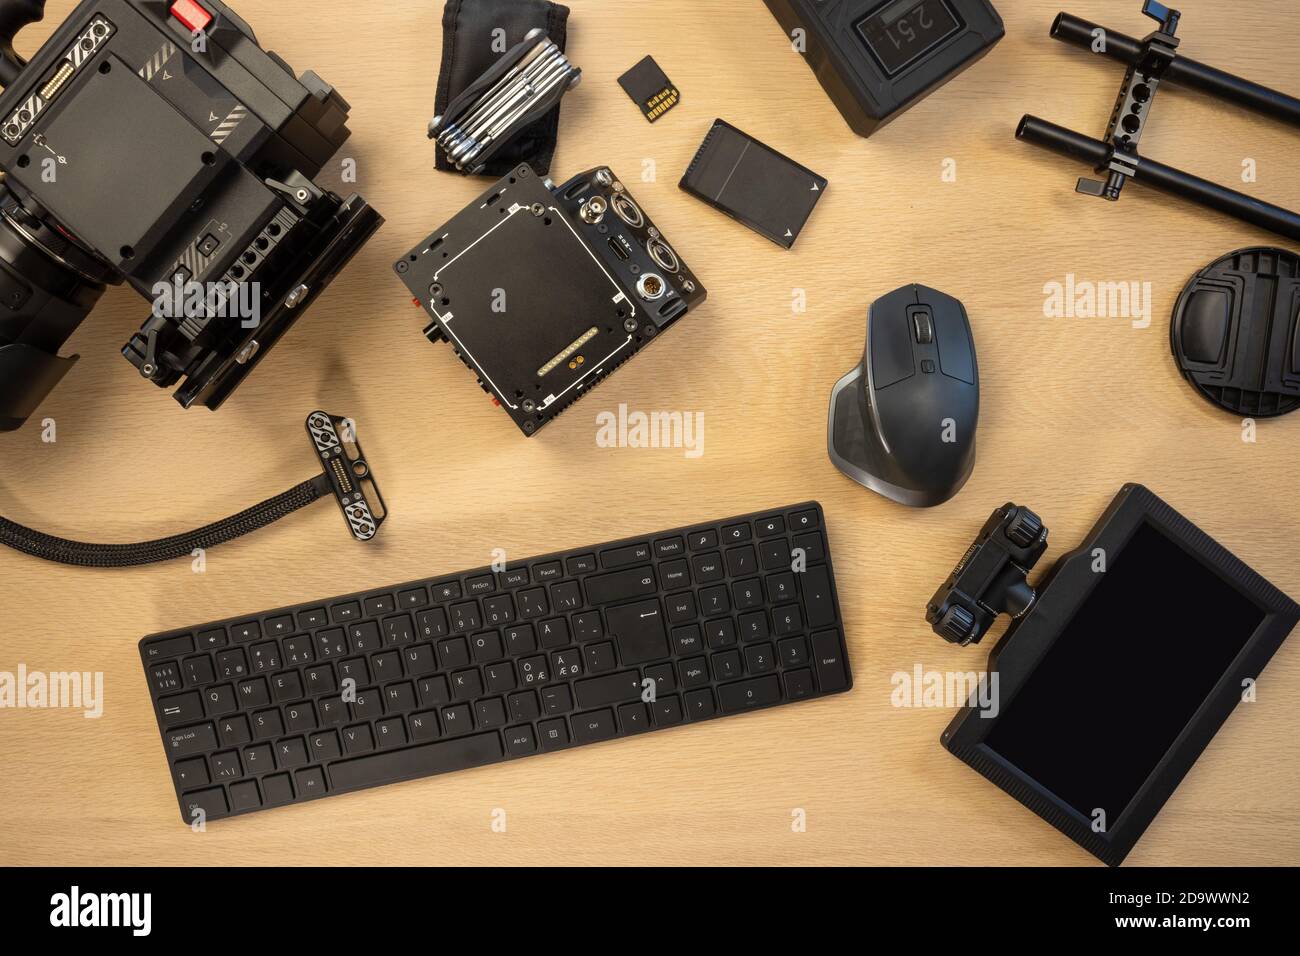 Flat lay of filming accessories with computer parts on table Stock Photo